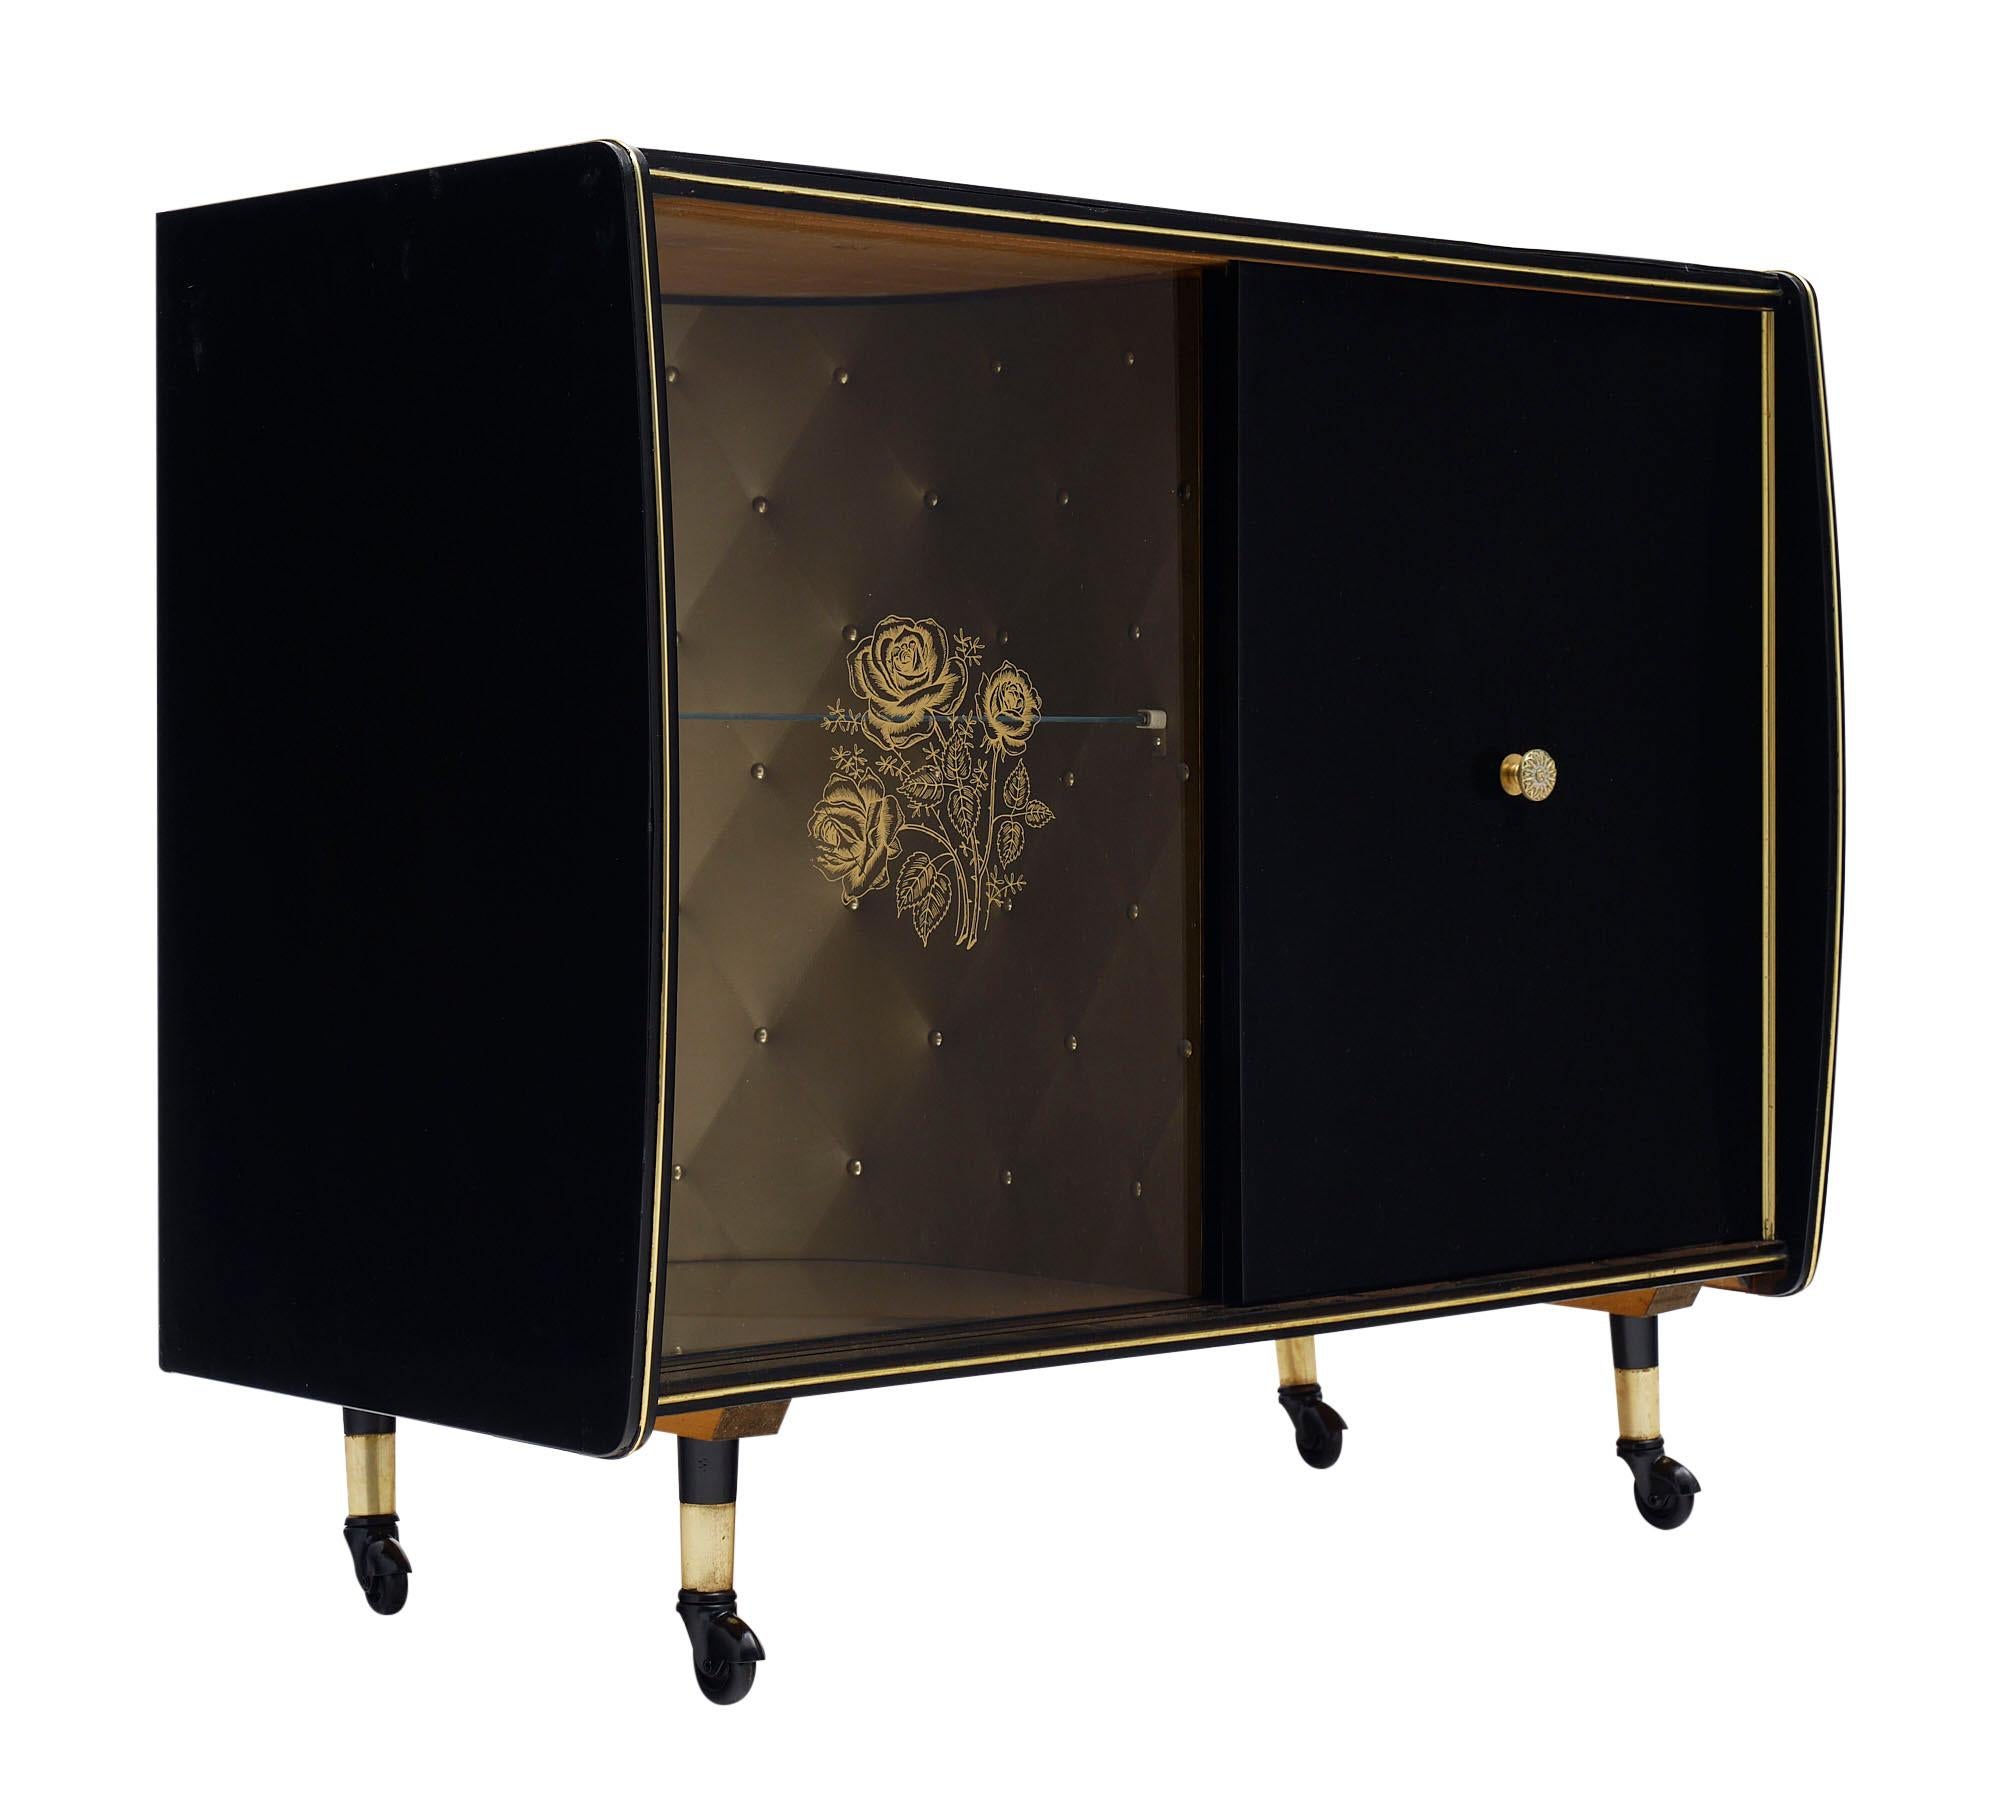 Bar cart; French; from the Modernist era with sliding wooden and glass doors. The glass door has a gold leafed floral motif. The cabinet is on wheels and is the top is veneered with textured black glass and trimmed with gilt brass. There are